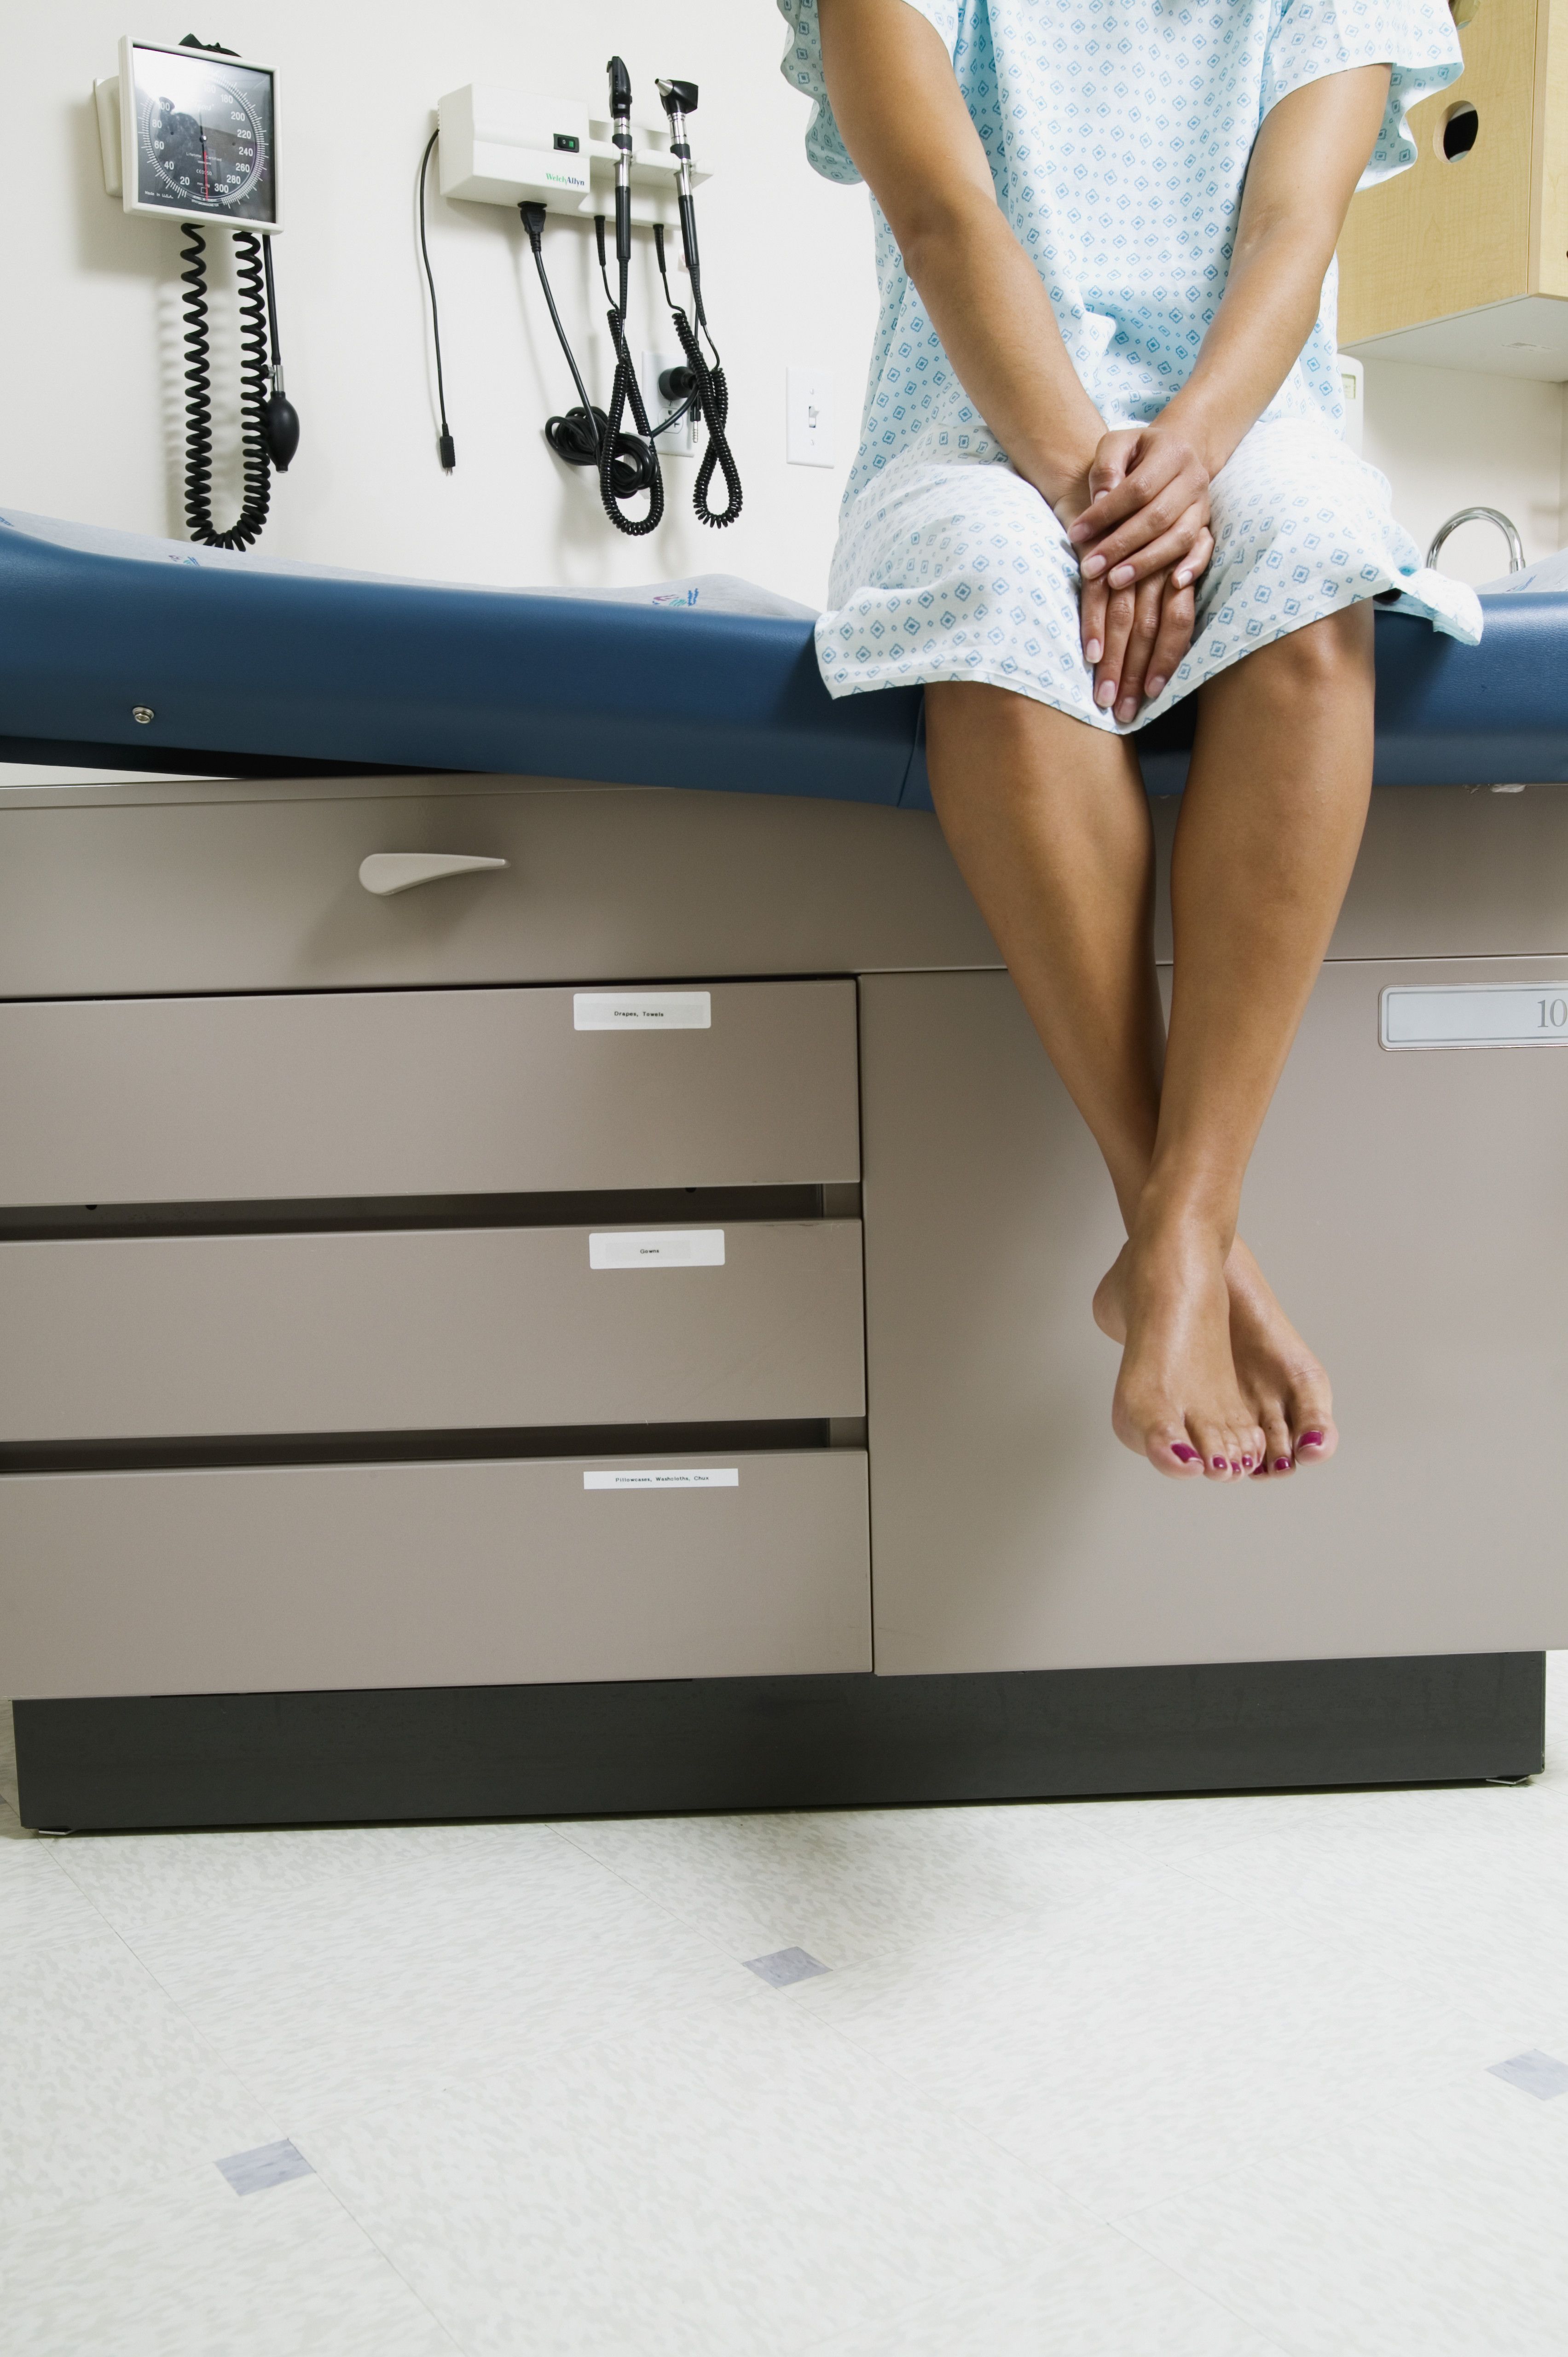 Pap Smear During Pregnancy